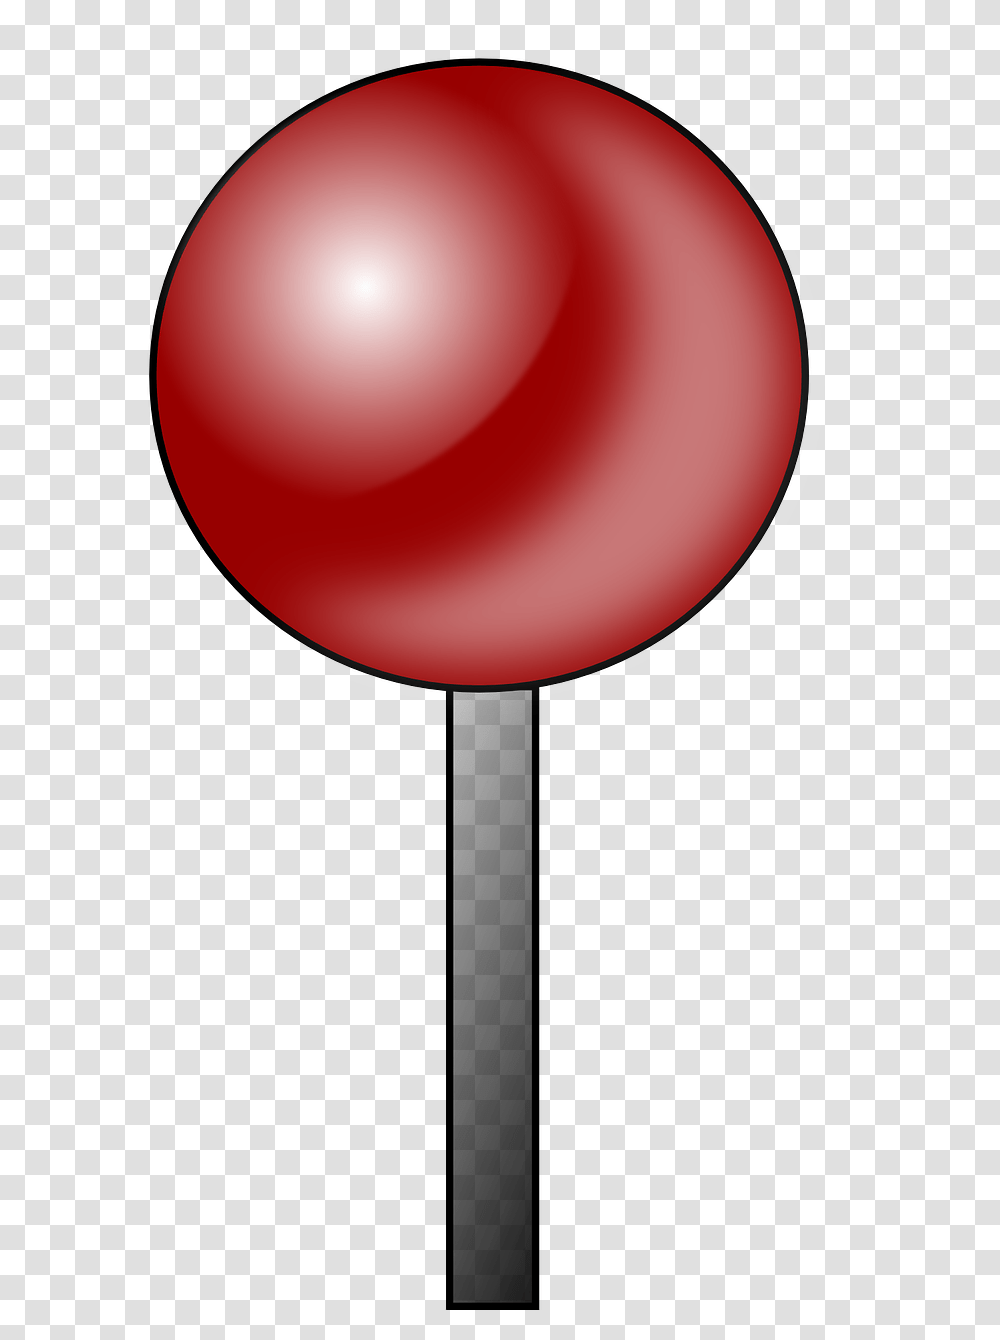 Lollipop Clip Art Candy Images On Clip Candies, Lamp, Food, Sweets, Confectionery Transparent Png